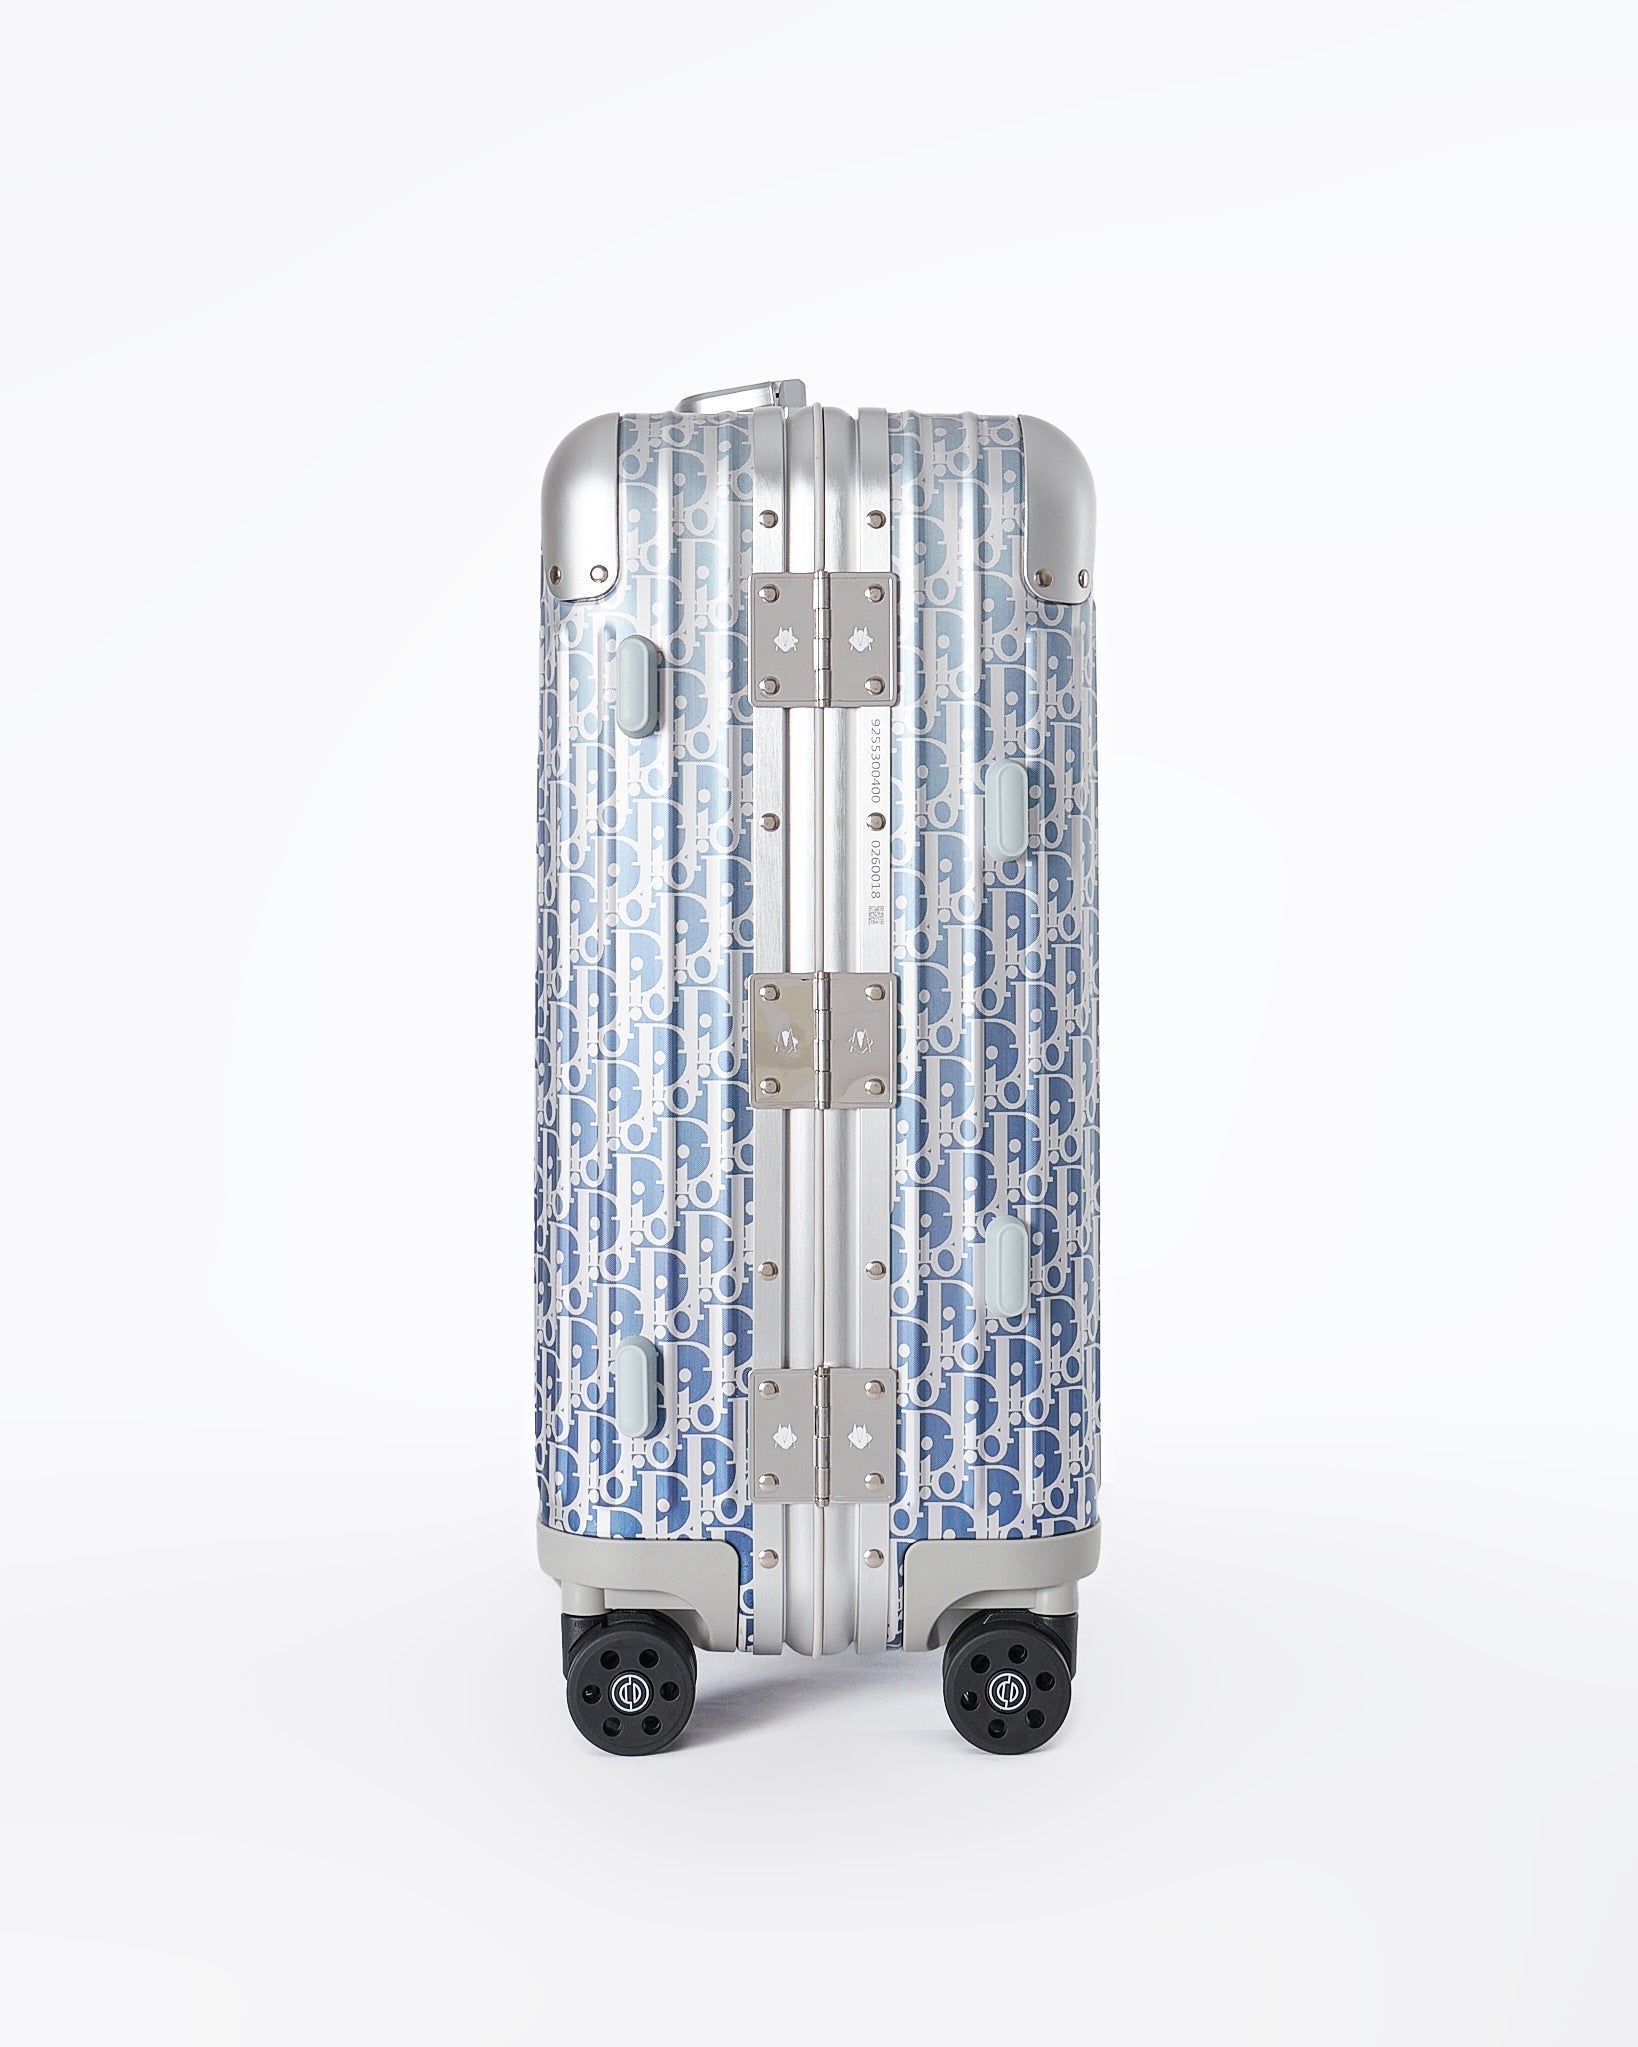 MOI OUTFIT-CD Monogram Over Printed Luggage Cabin Size 269.90